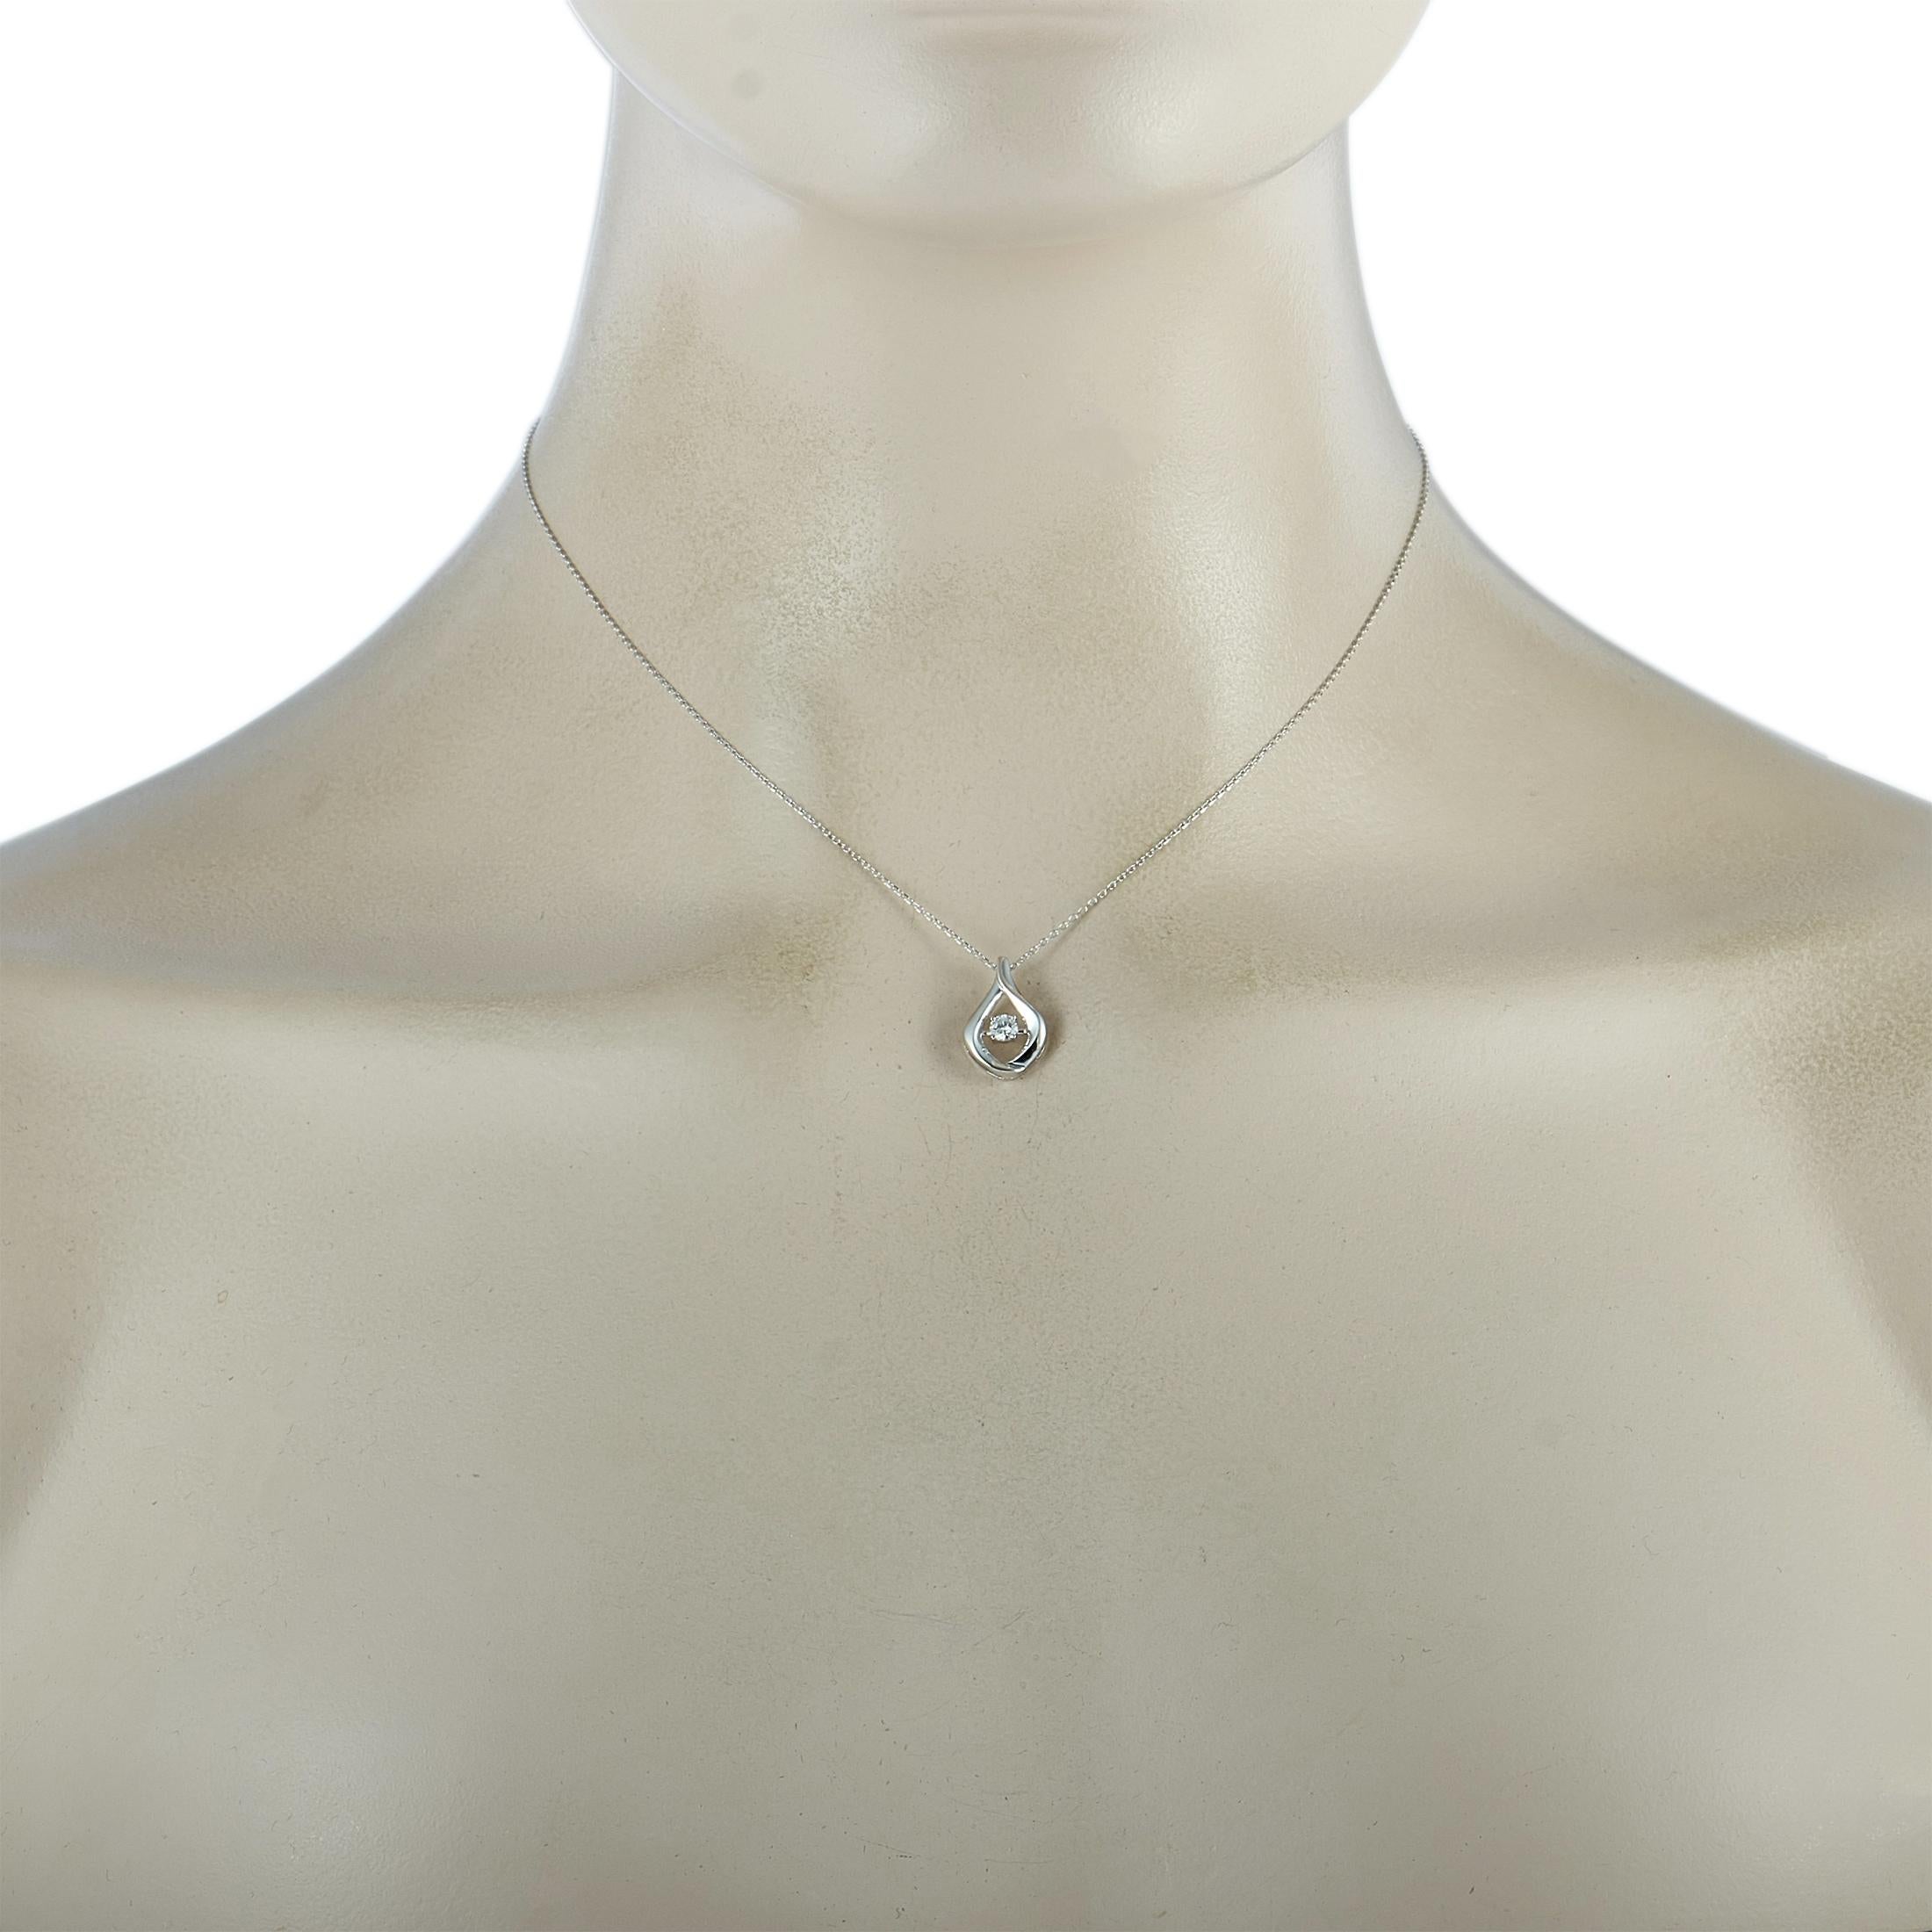 This LB Exclusive necklace is crafted from 14K white gold and weighs 2.3 grams. It is presented with a 15” chain and a pendant that measures 0.62” in length and 0.40” in width. The necklace is set with a diamond stone that weighs 0.15 carats.
 
